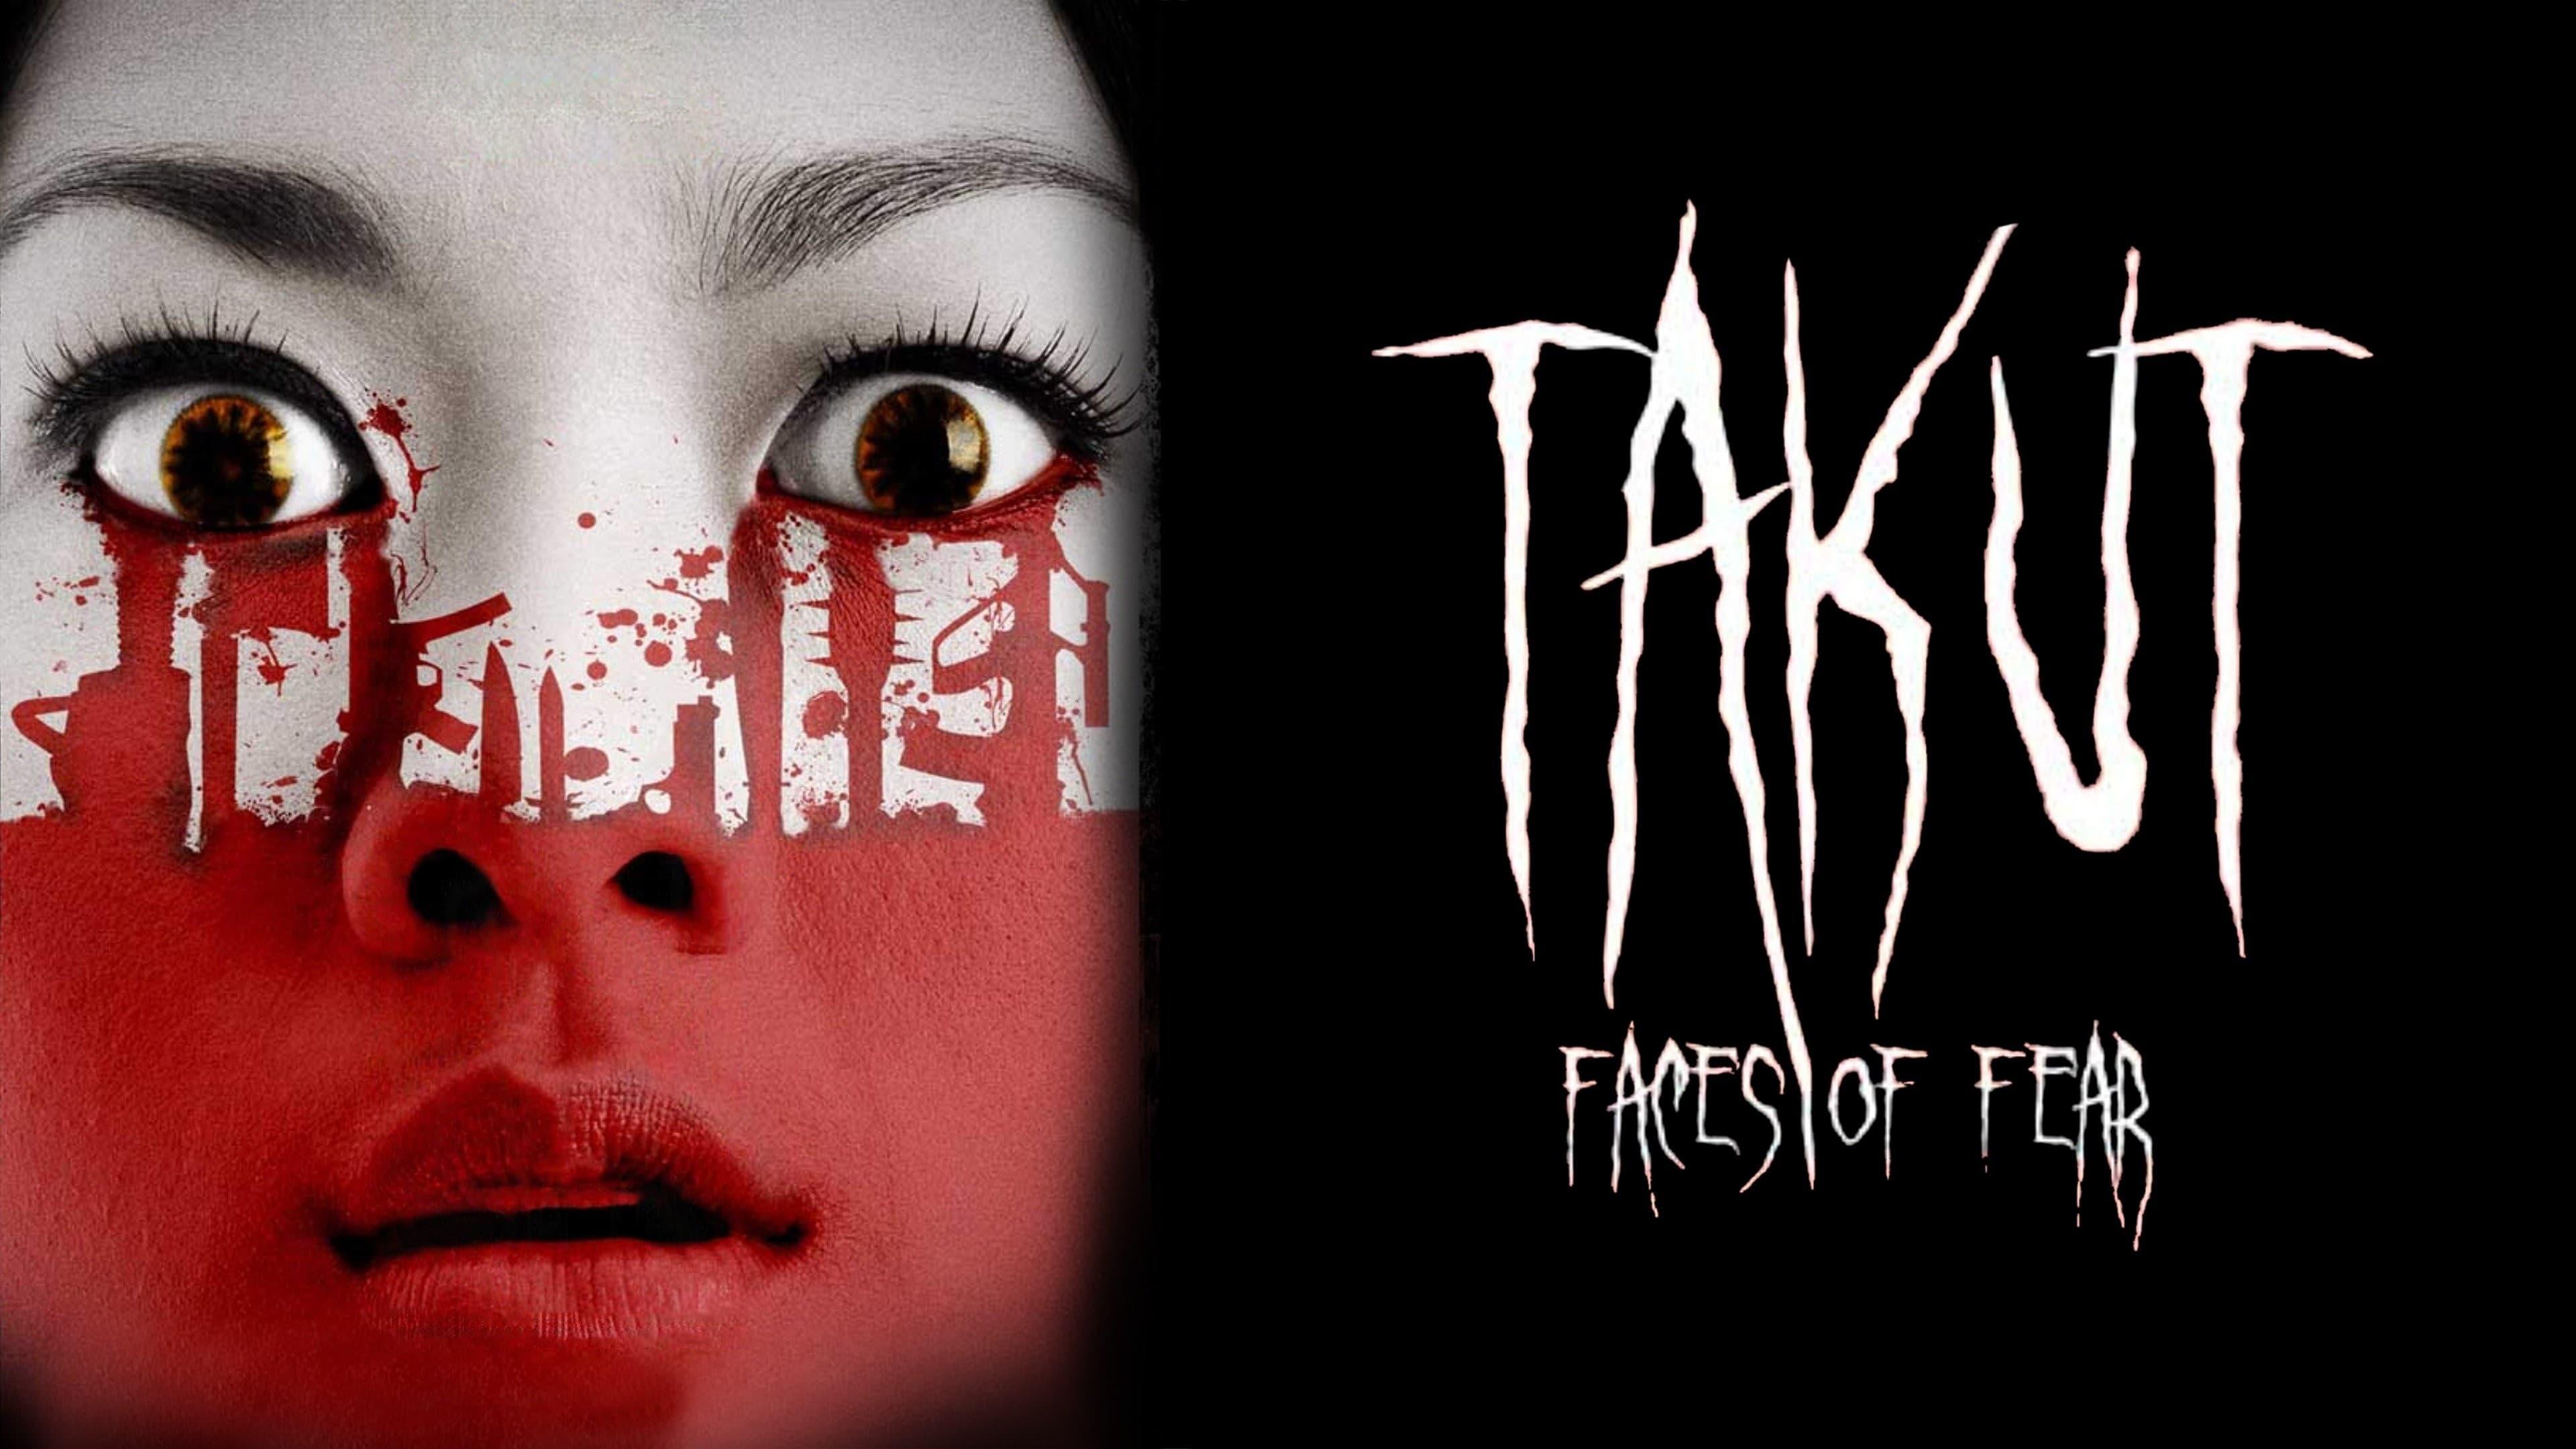 Takut: Faces of Fear backdrop